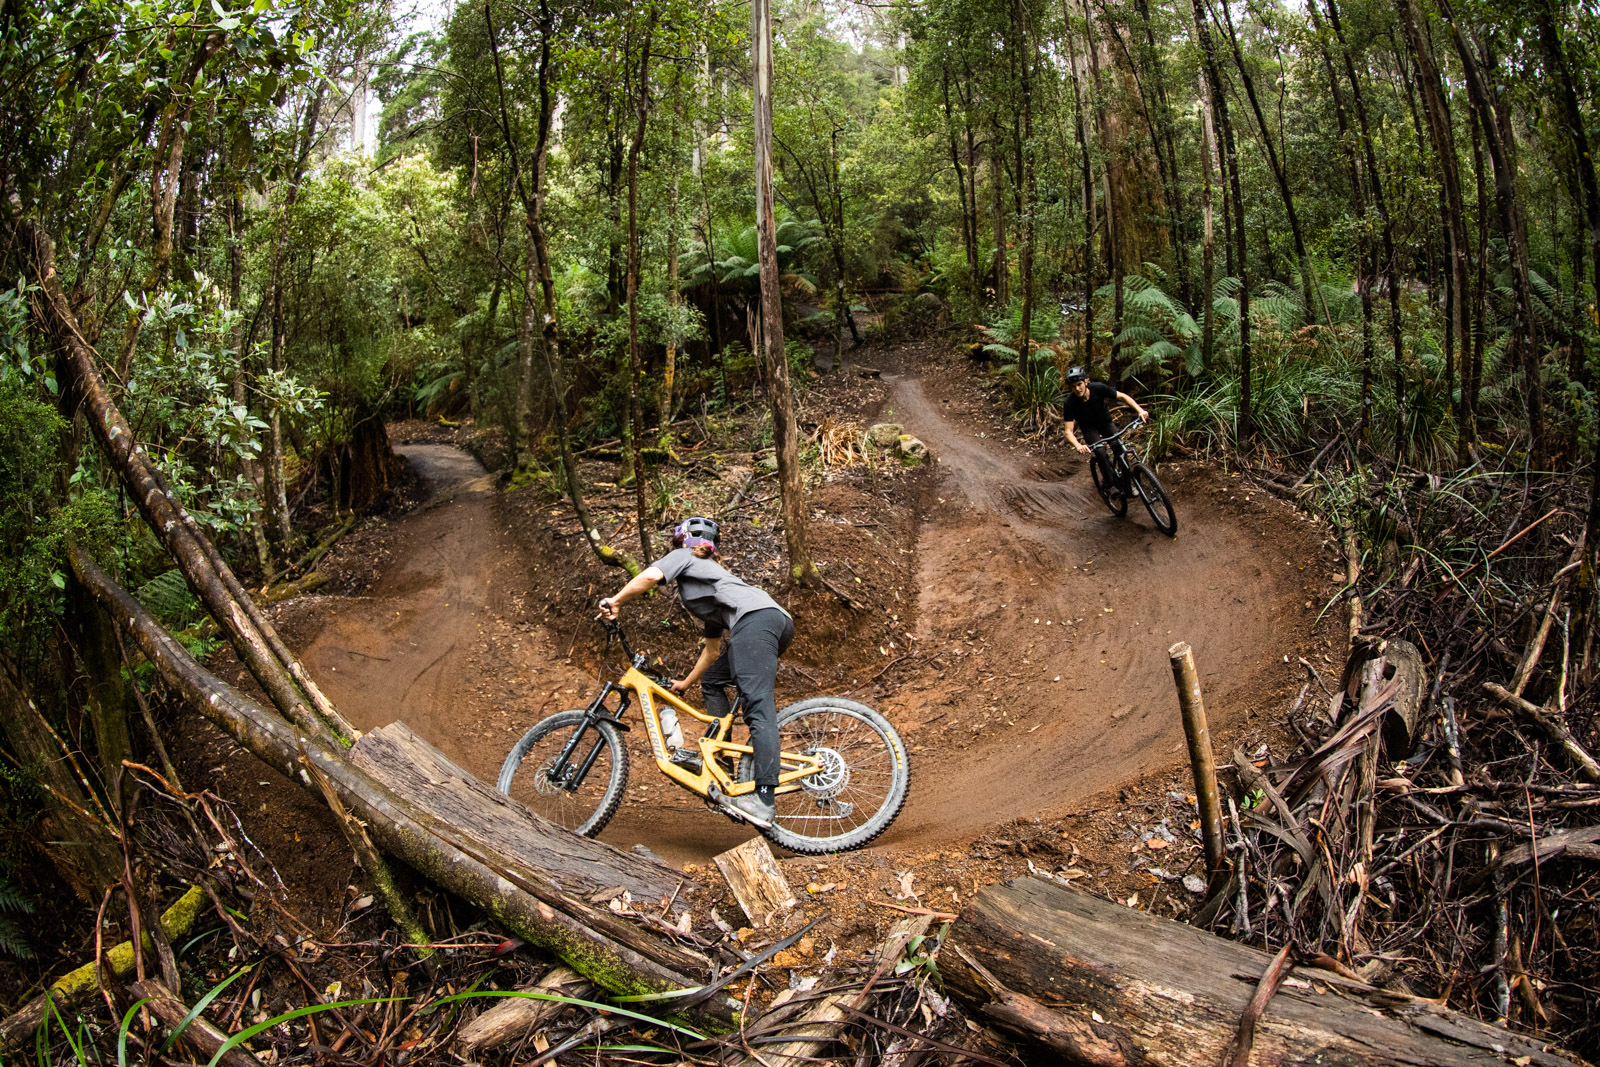 Blue Derby features smooth flowing berms as well as plenty of rock tech trails